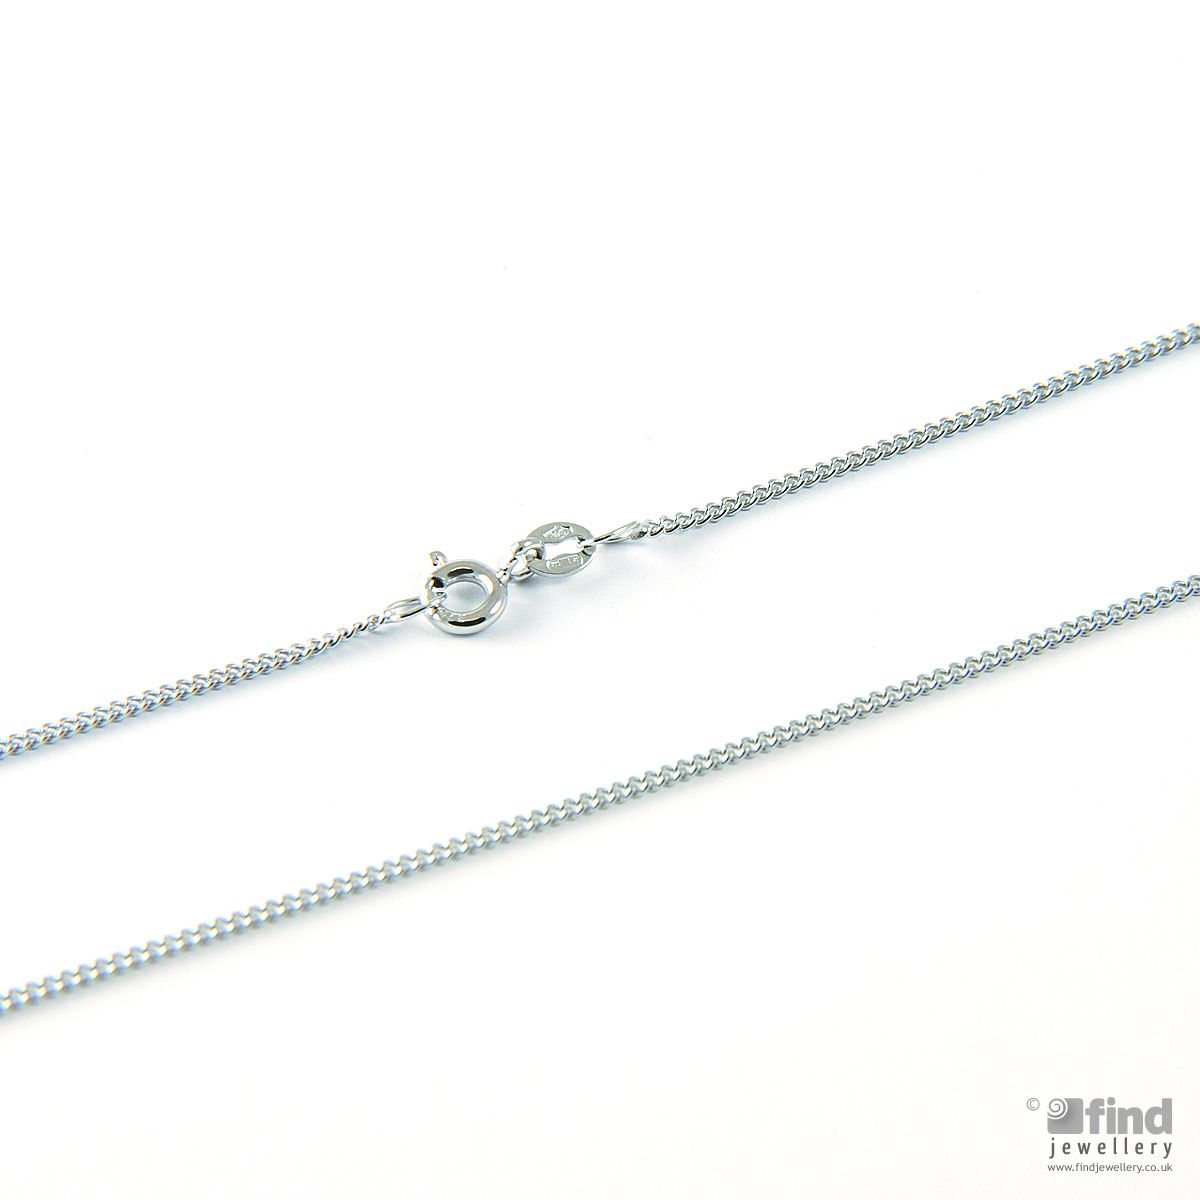 Unbranded 9ct White Gold Curb Chain 2.5g